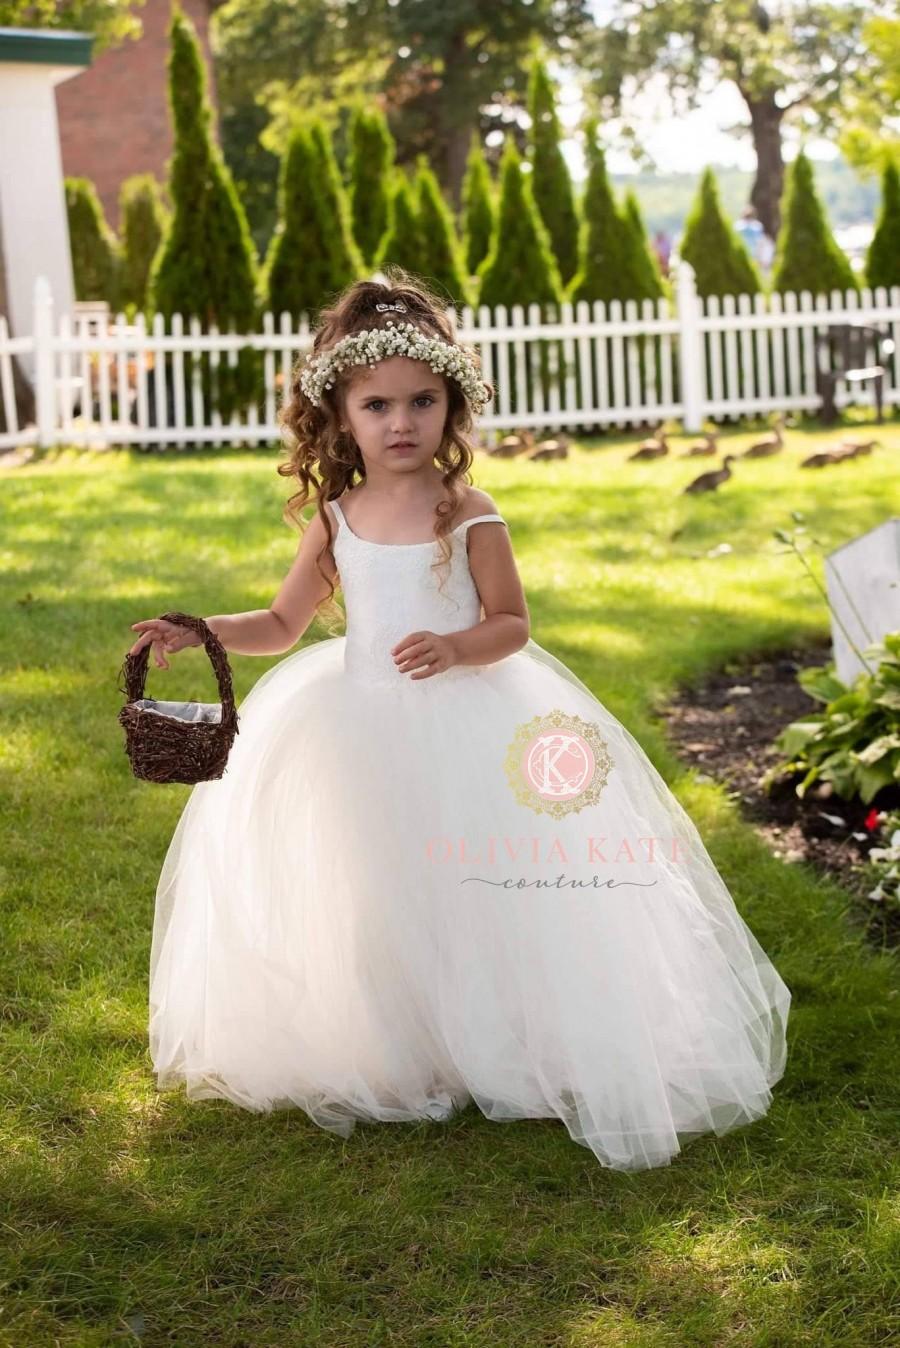 Hochzeit - French Lace Flower Girl Dress, Tulle Tutu Flower Girl Dresses, Toddler Dress, Weddings